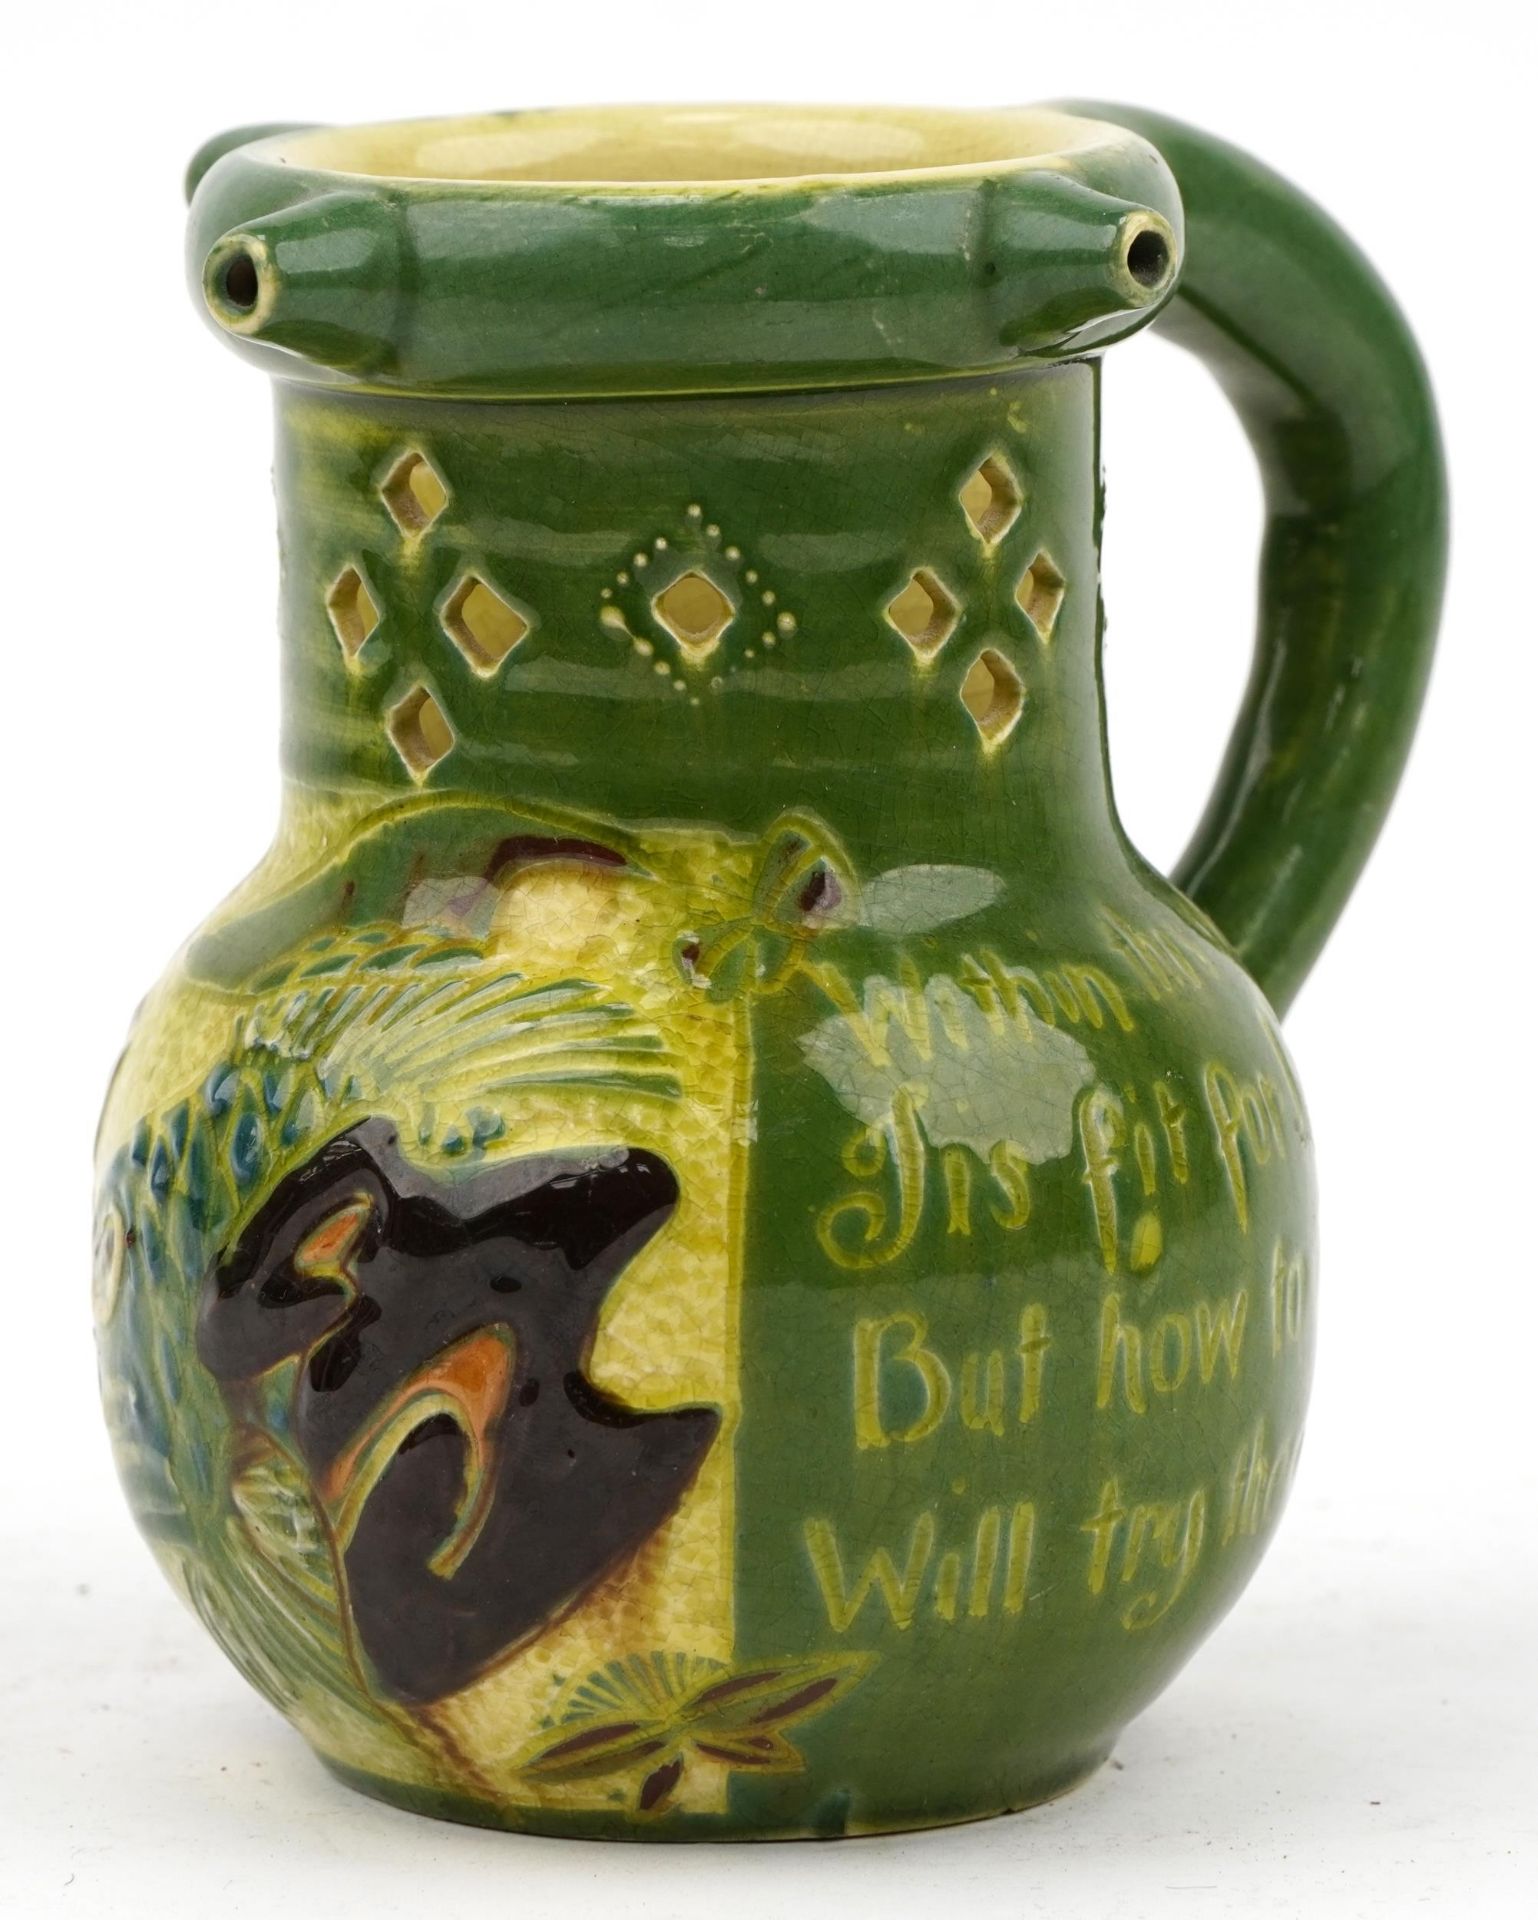 C H Brannam, Arts & Crafts Scraffito pottery puzzle jug hand painted with stylised fish and